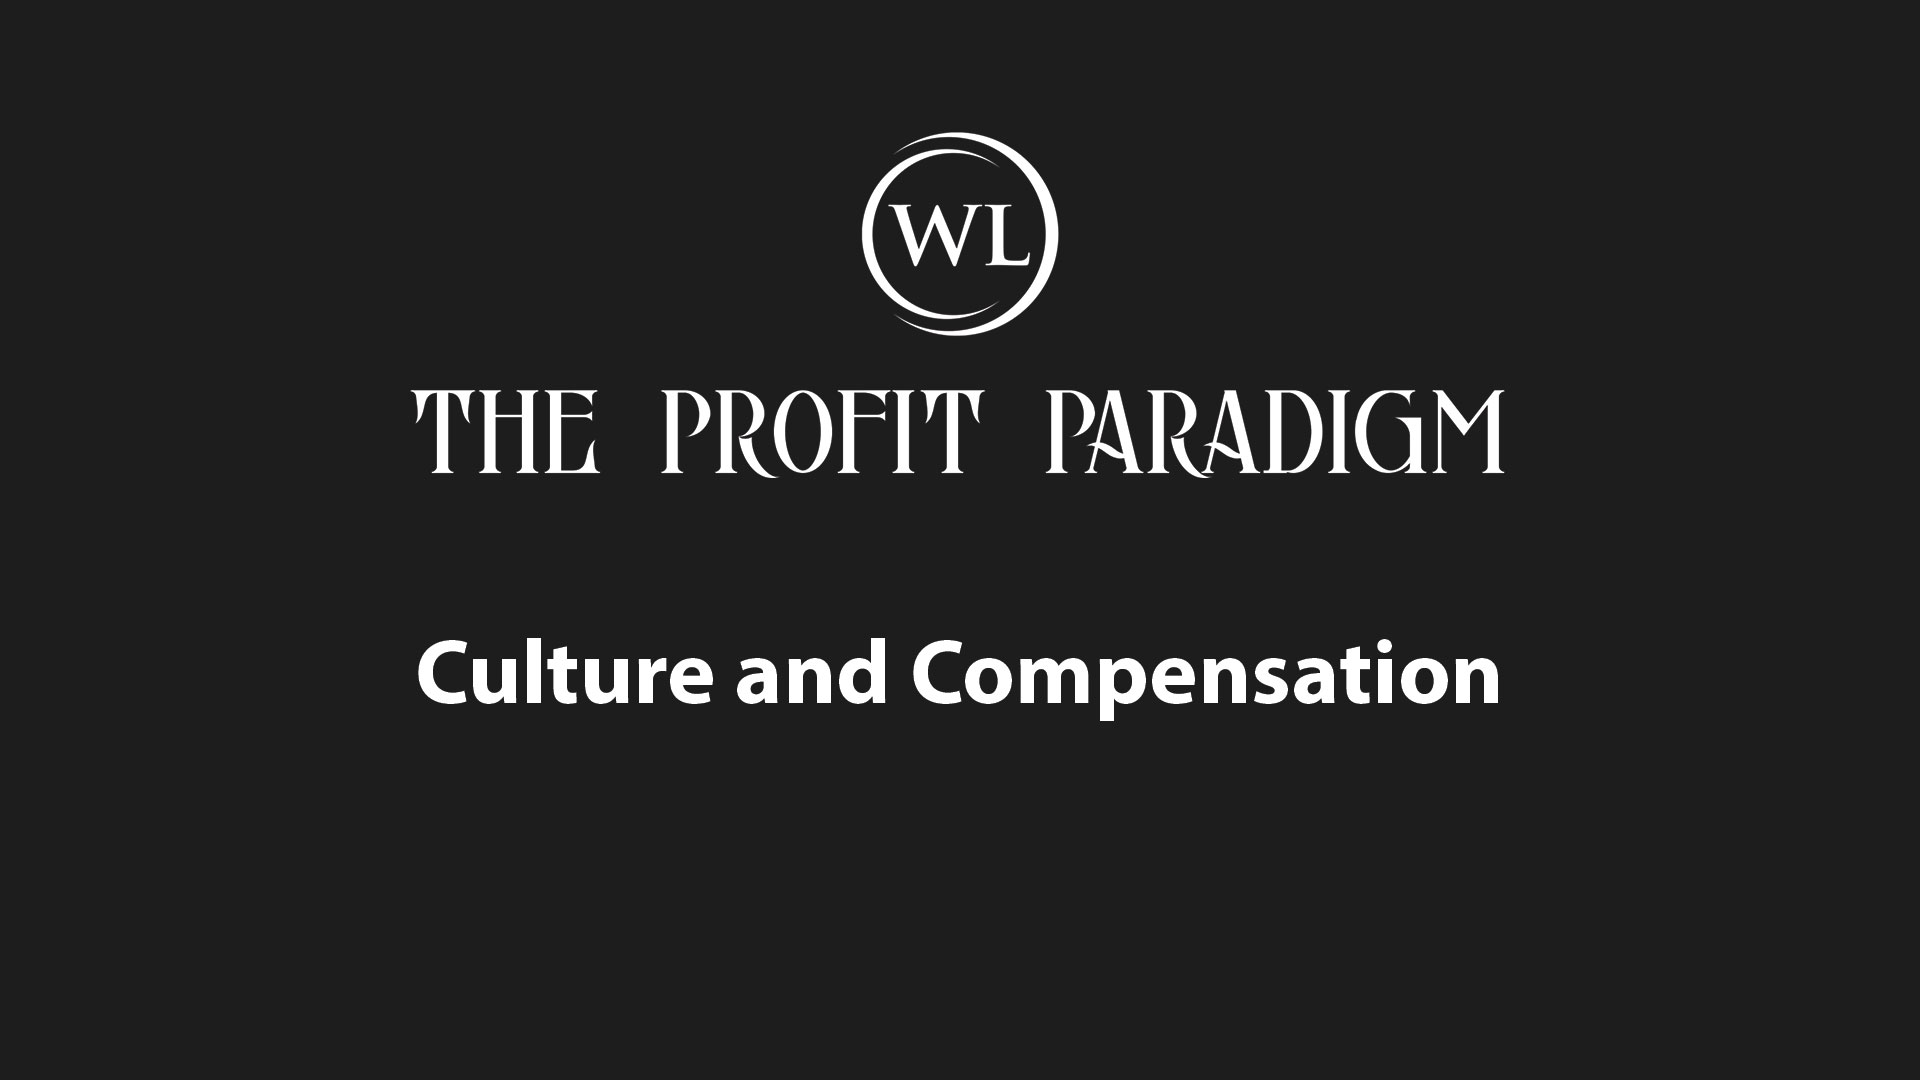 Culture and Compensation